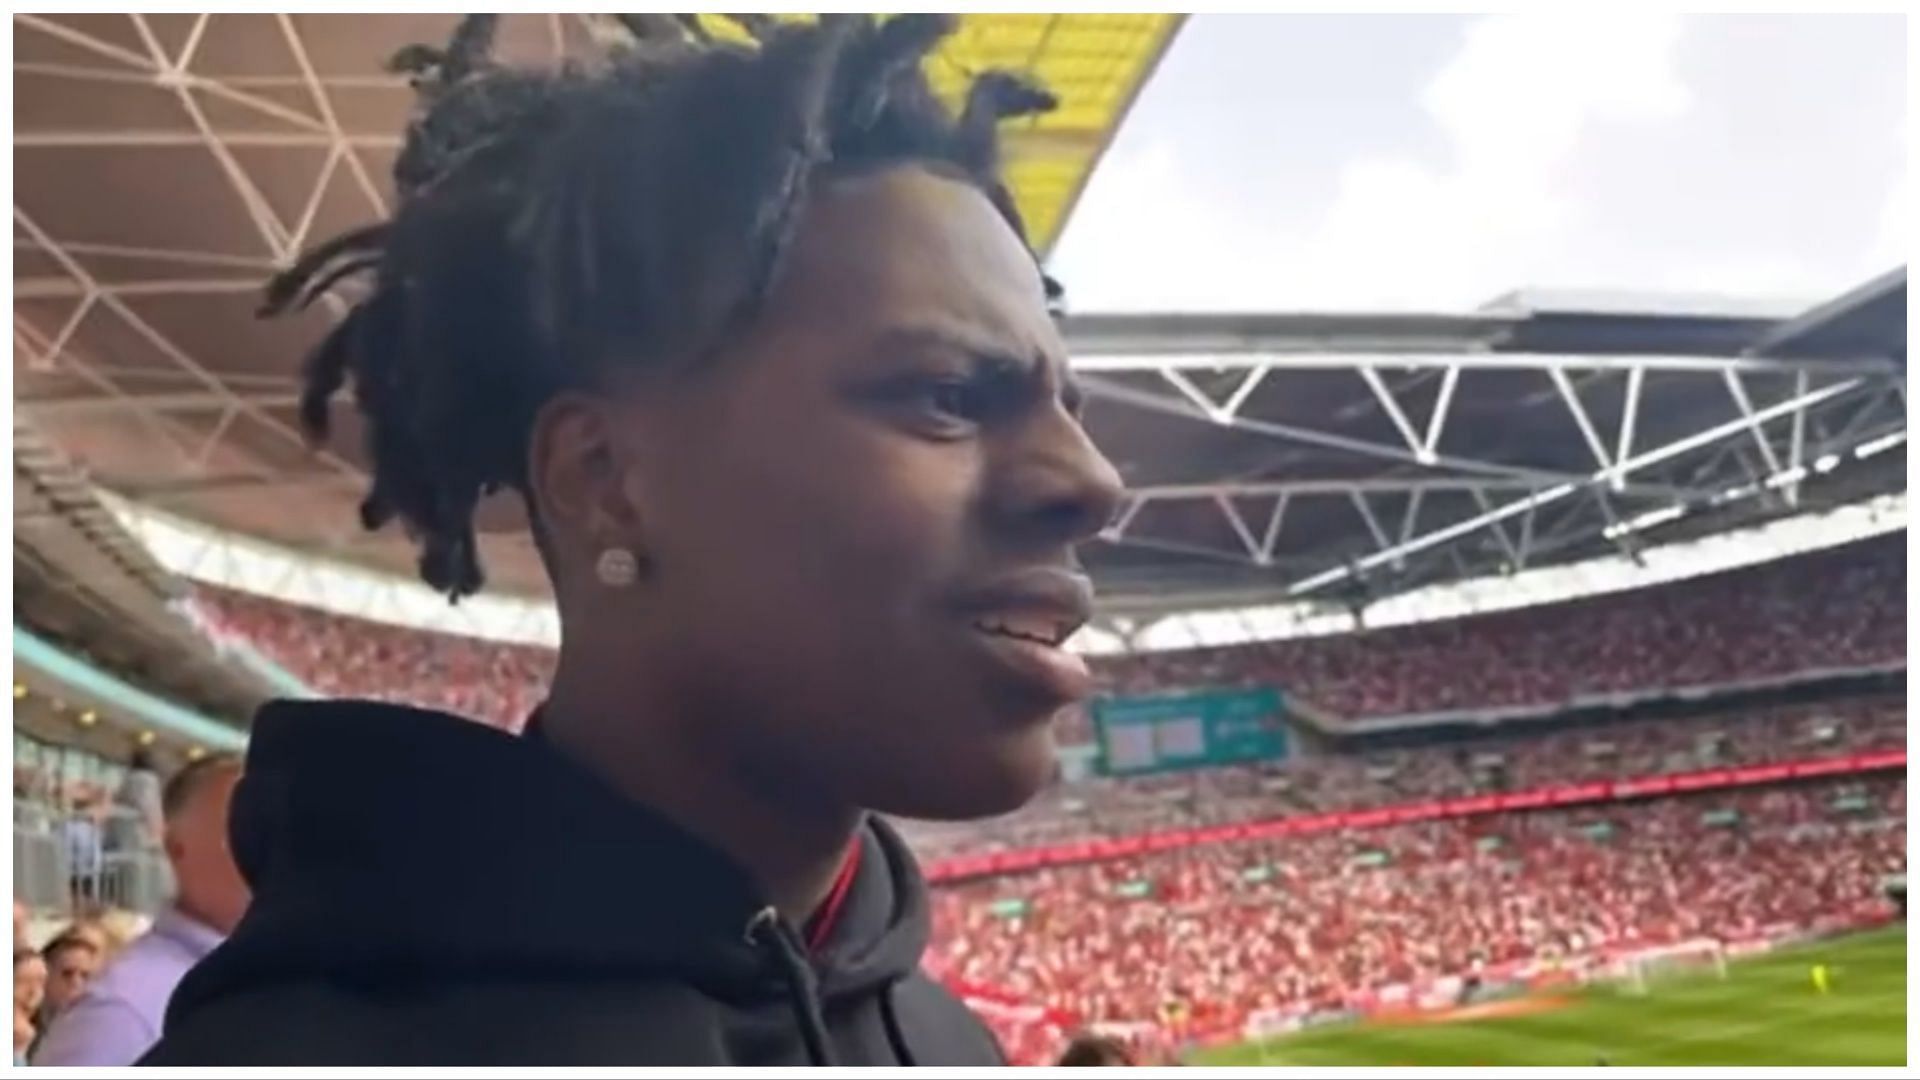 YouTuber IShowSpeed was attacked by a Manchester City fan during the FA Cup Final at Wembley Stadium (Image via Twitter)